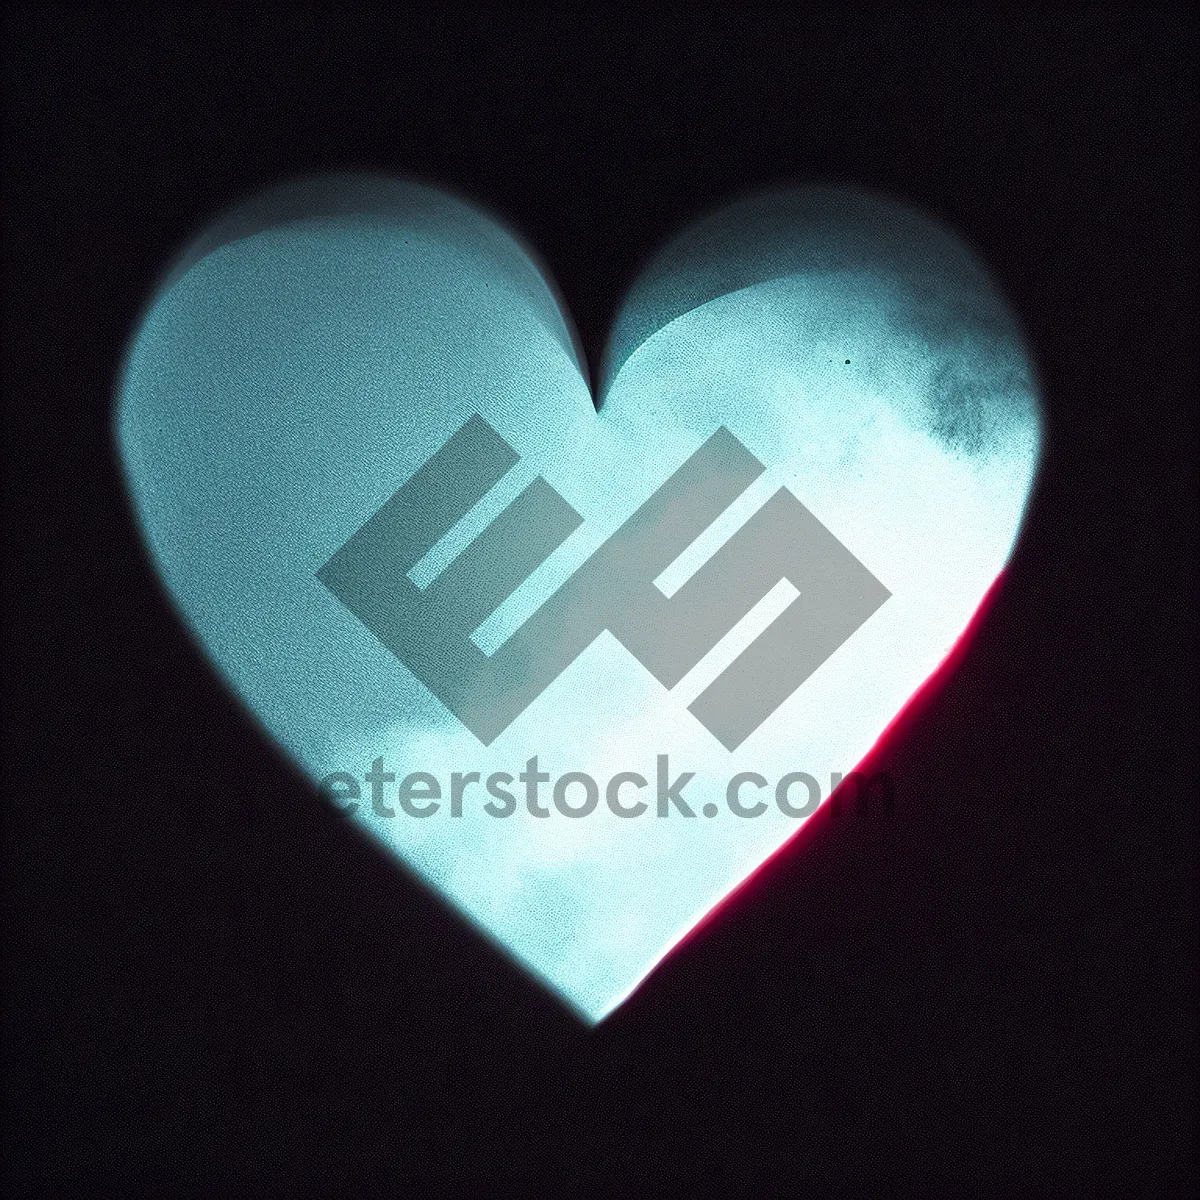 Picture of Celestial Heart: A Radiant Reflection of Love in the Universe